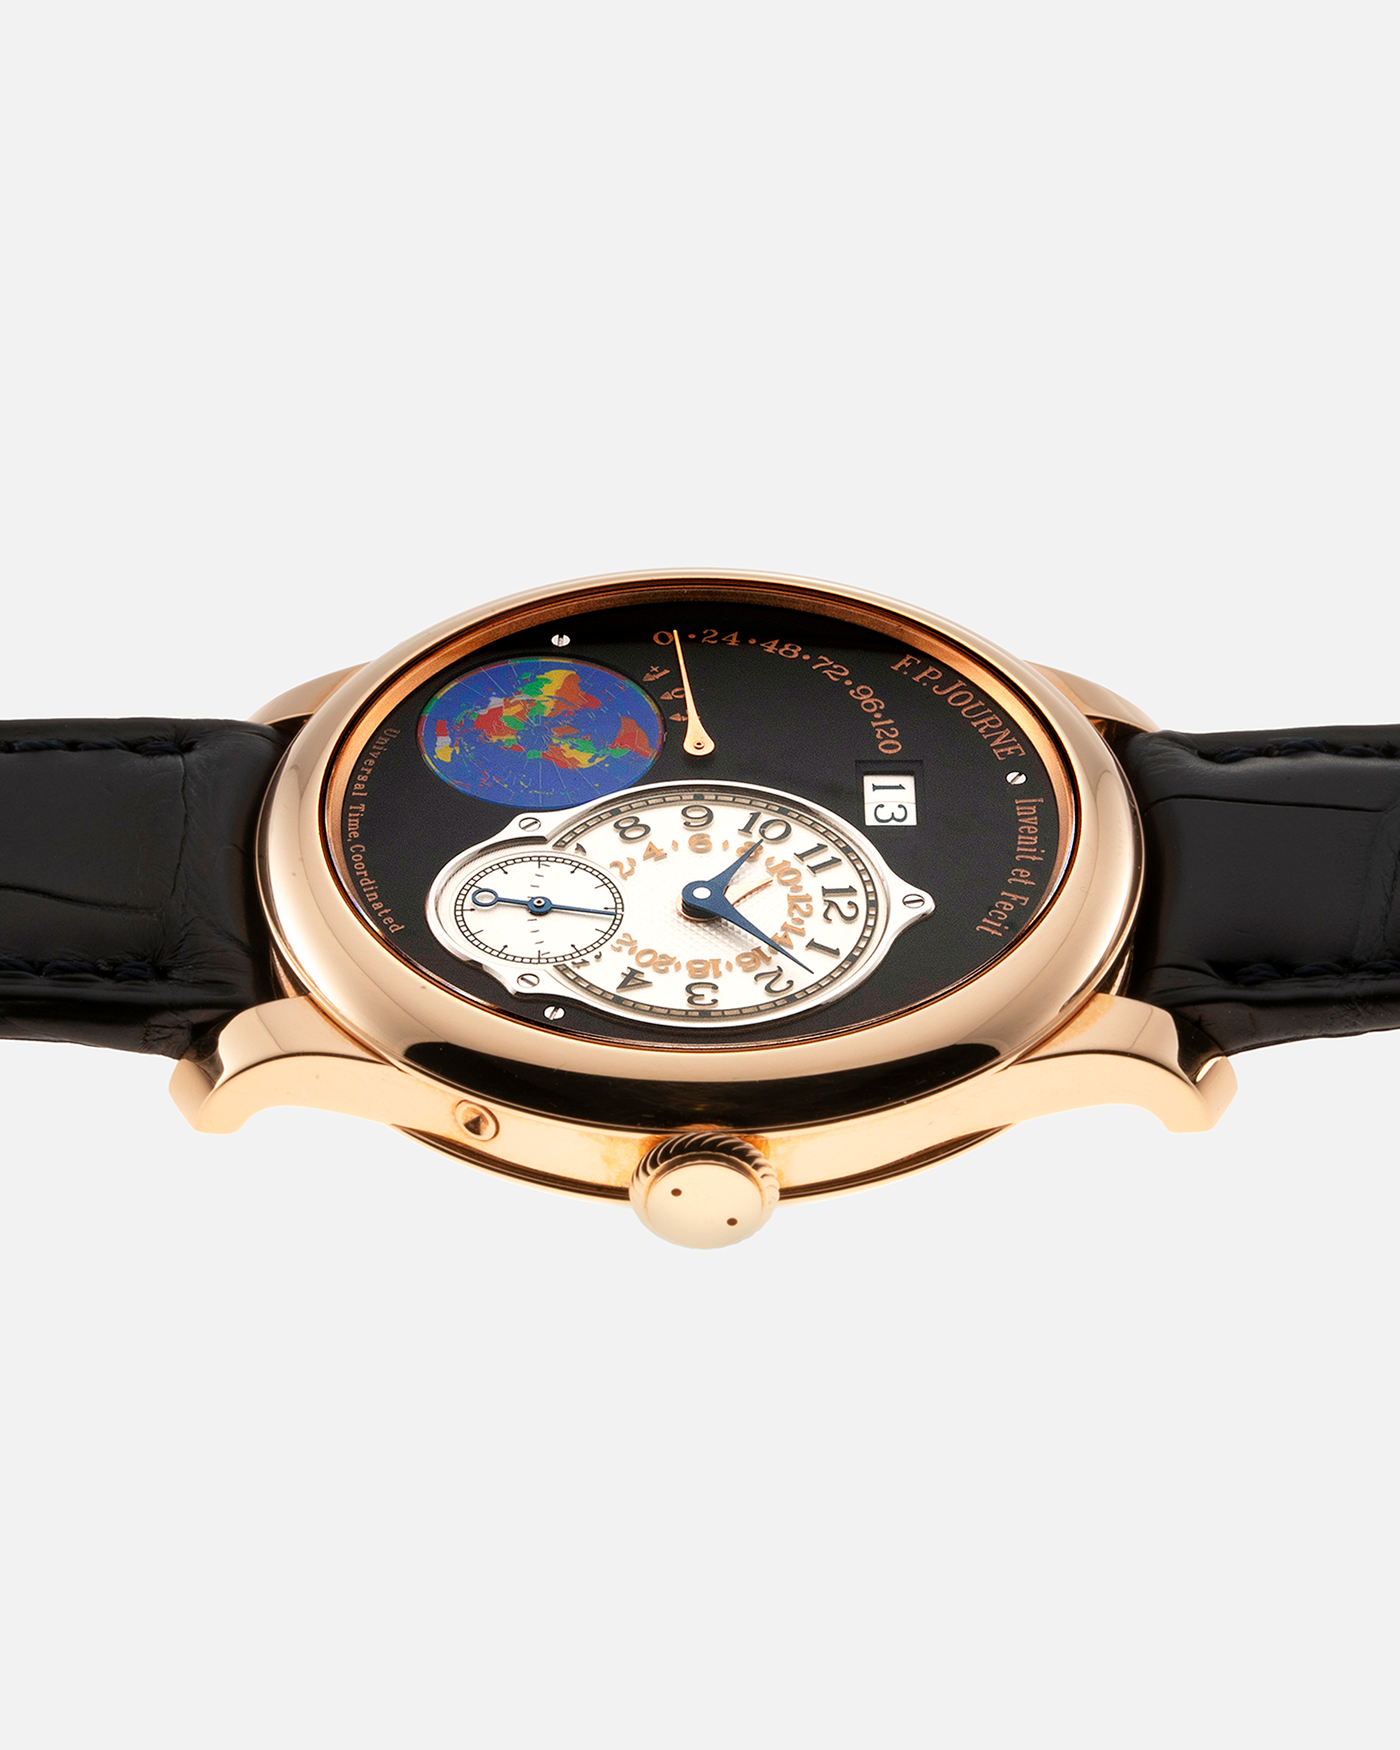 Brand: F. P. Journe. Year: 2020 Model: Octa UTC Material: 18-carat Rose Gold Movement: FPJ Cal. 1300-3 in 18-carat Rose Gold, Self-Winding Case Diameter: 40mm Bracelet / Strap: F. P. Journe Navy Black Alligator and 18-carat Rose Gold Signed Tang Buckle with additional F. P. Journe Aegean Blue Alligator Leather Strap, and Cobalt Blue Alligator Leather Strap. 